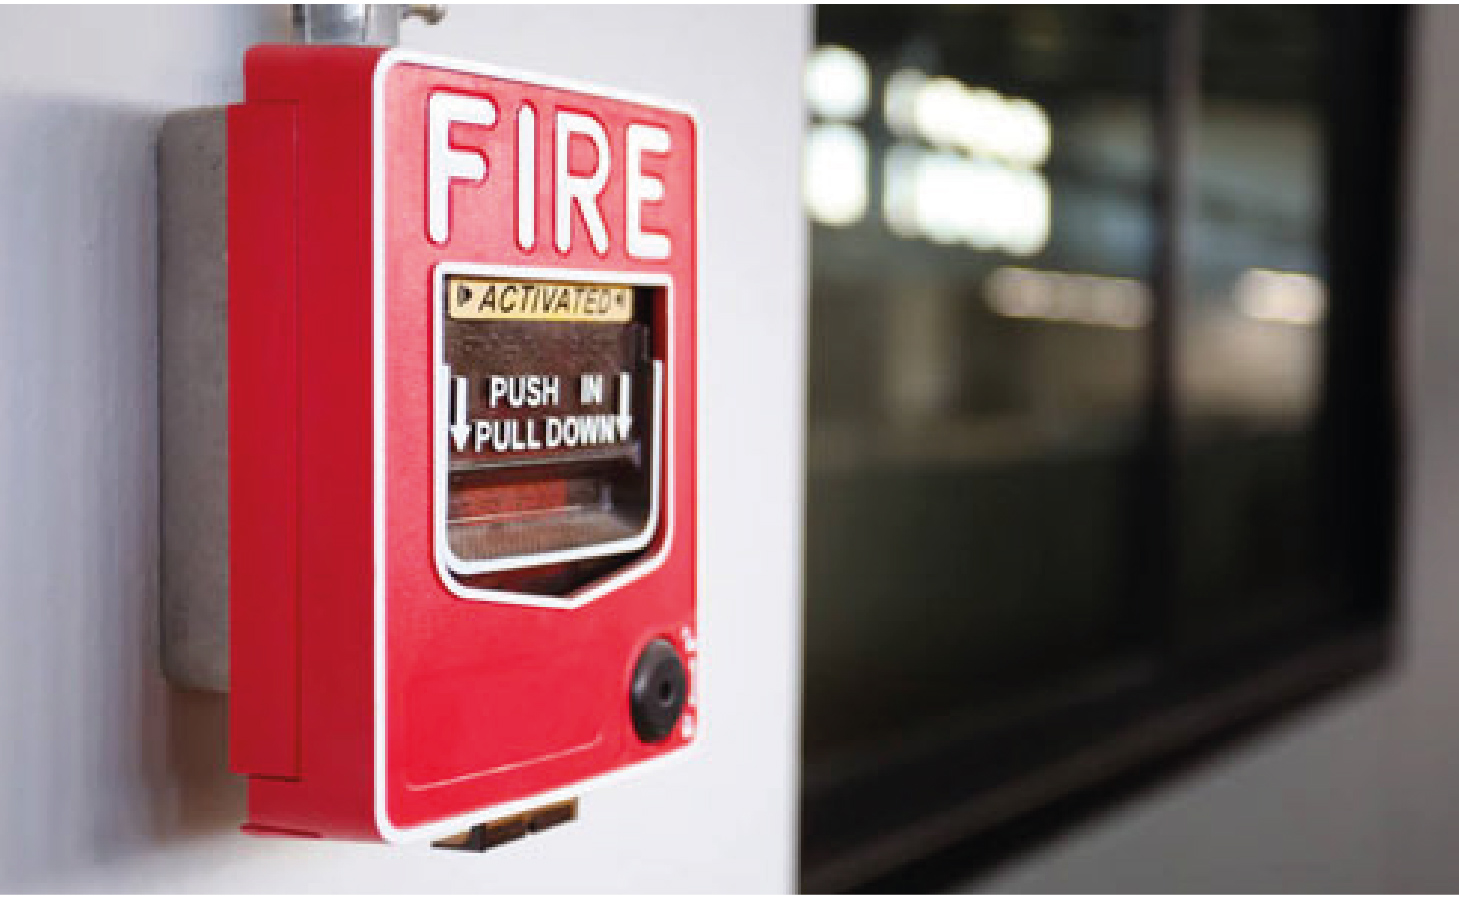 fire detection system designs in Zimbabwe